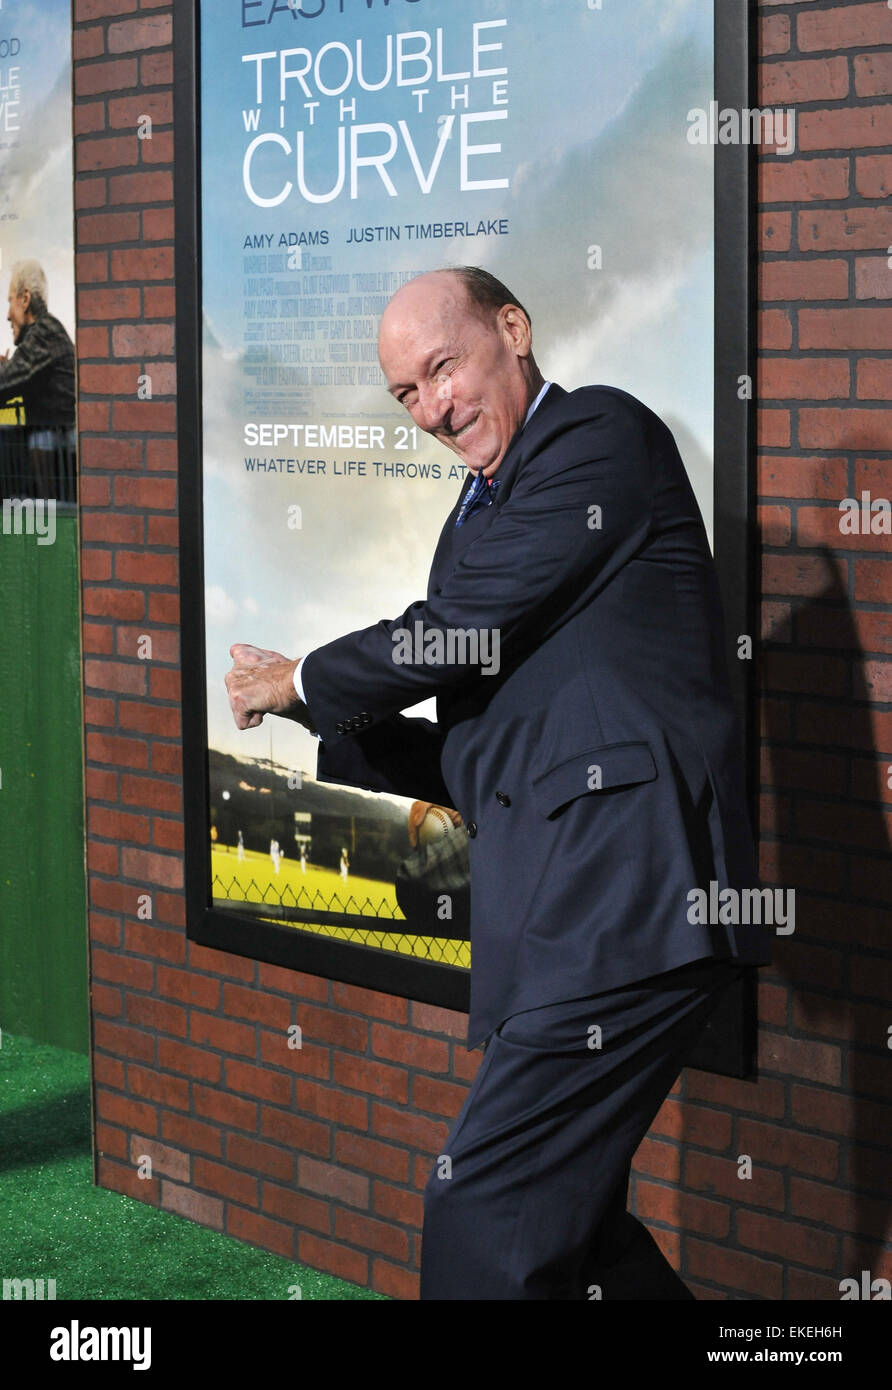 LOS ANGELES, CA - SEPTEMBER 19, 2012: Ed Lauter at the premiere of his movie 'Trouble With The Curve' at the Mann Village Theatre, Westwood. Stock Photo